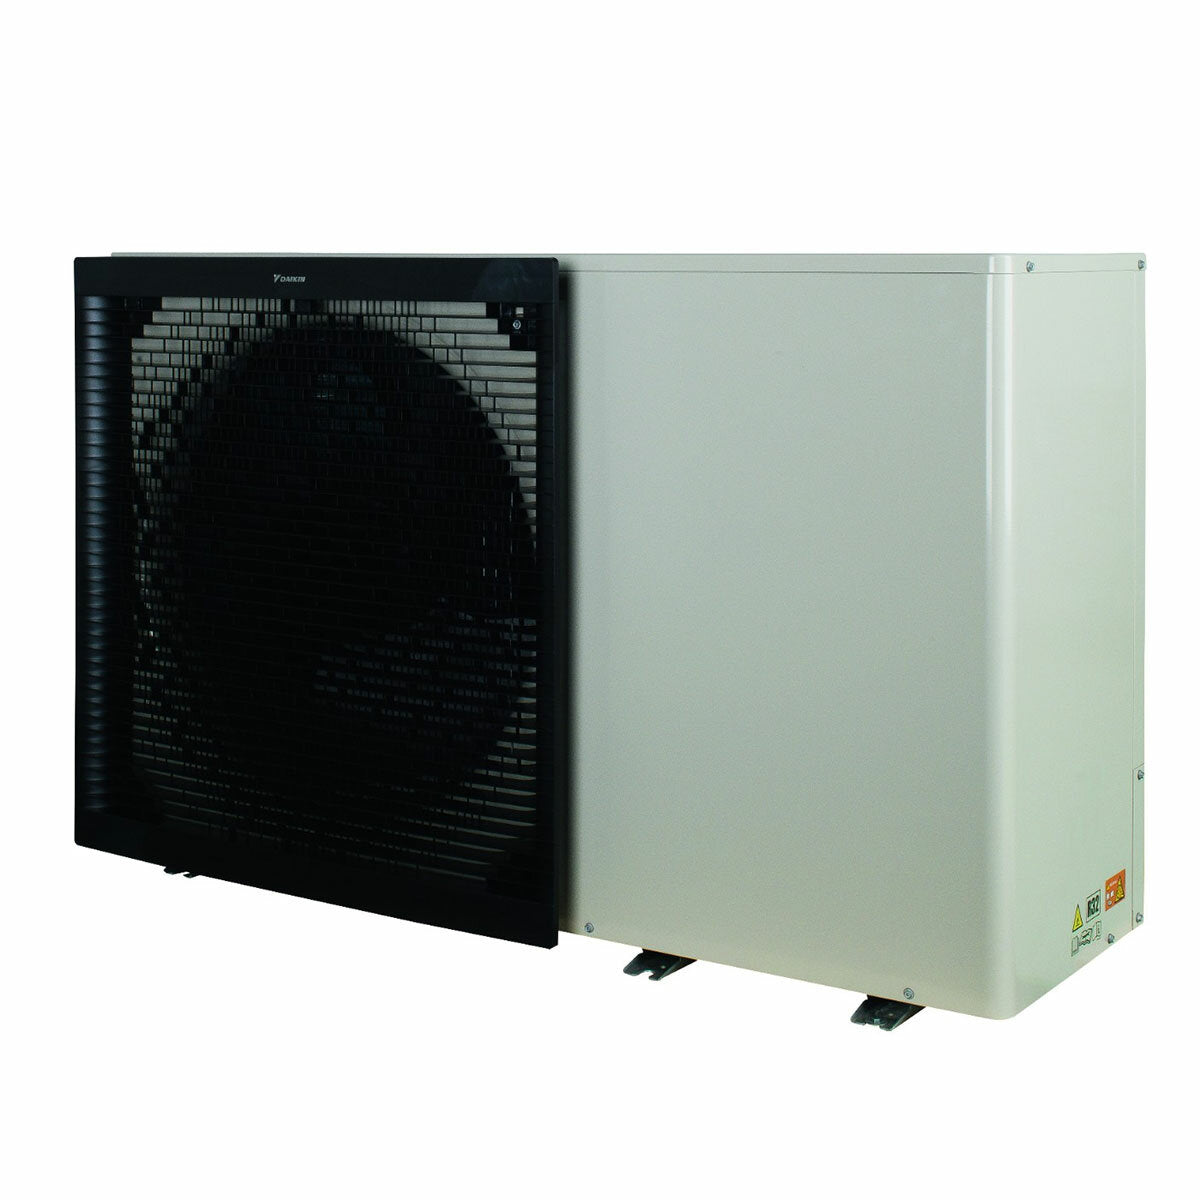 Daikin air/water heat pump 9 kW single-phase power supply with R32 A++ gas hydronic module